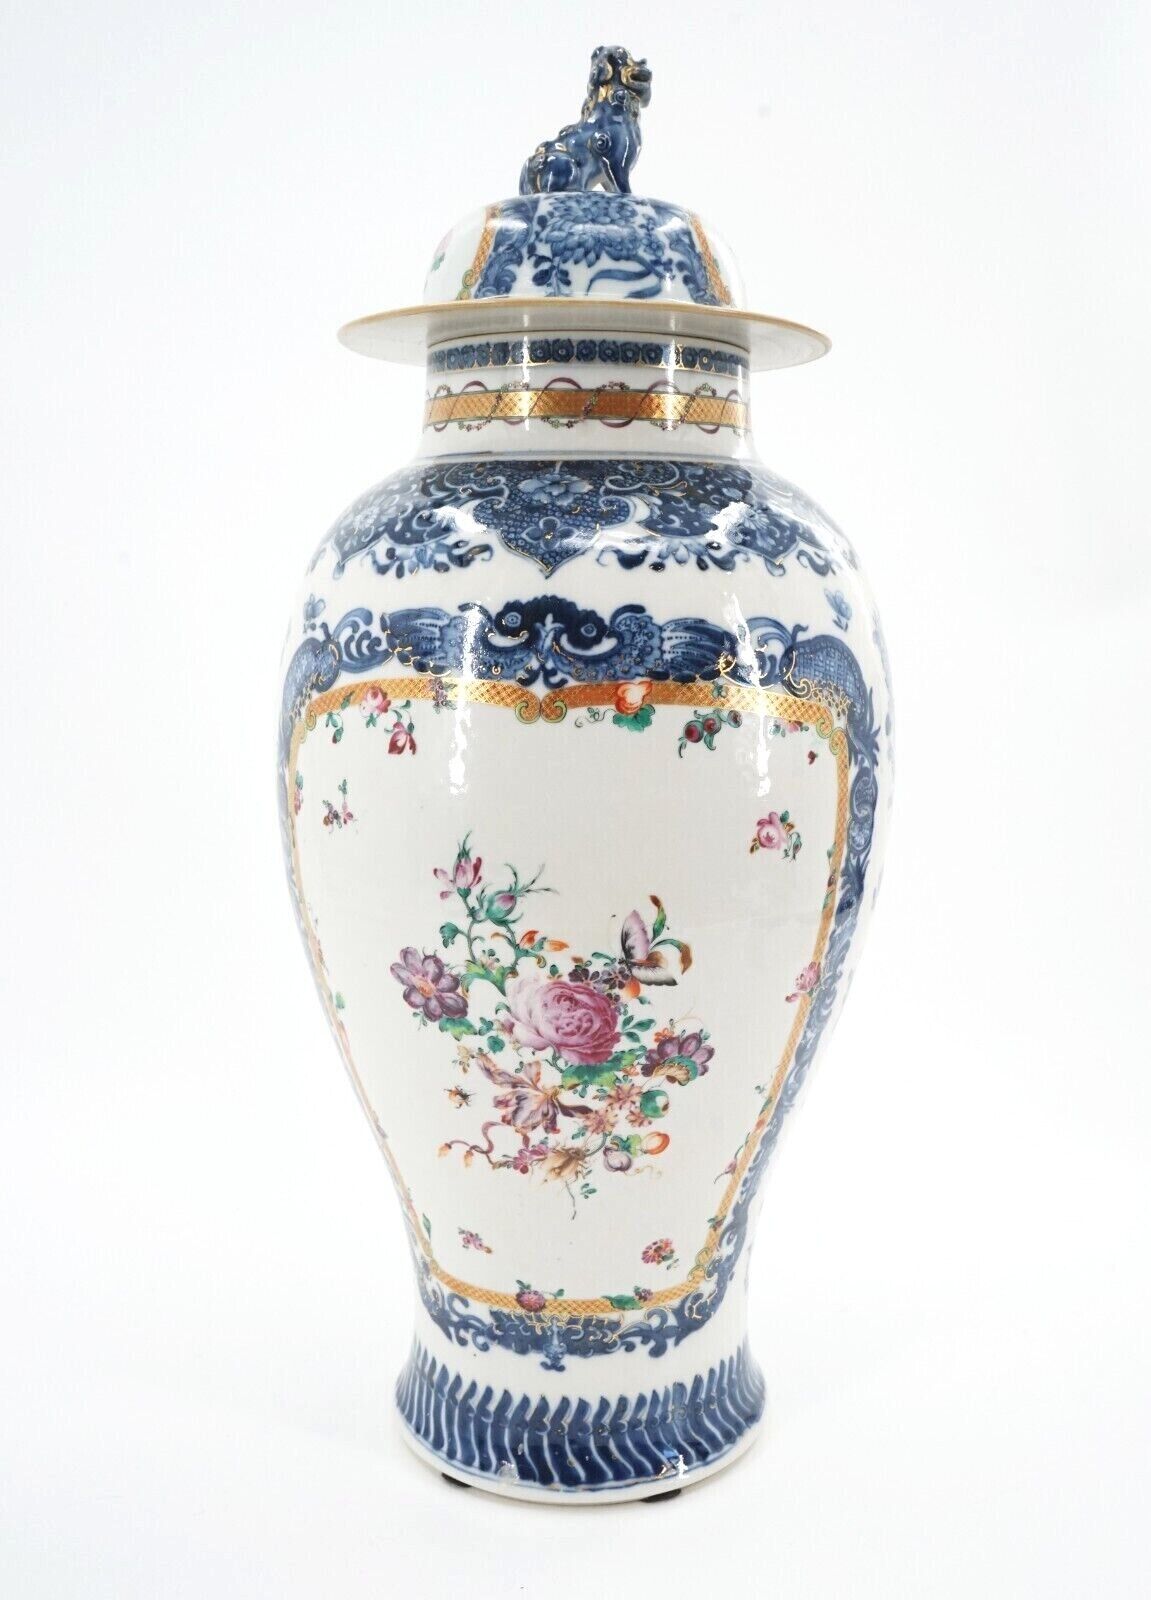 18th C Qianlong Famille Rose Chinese Export Baluster Vase 22 Inches in Height